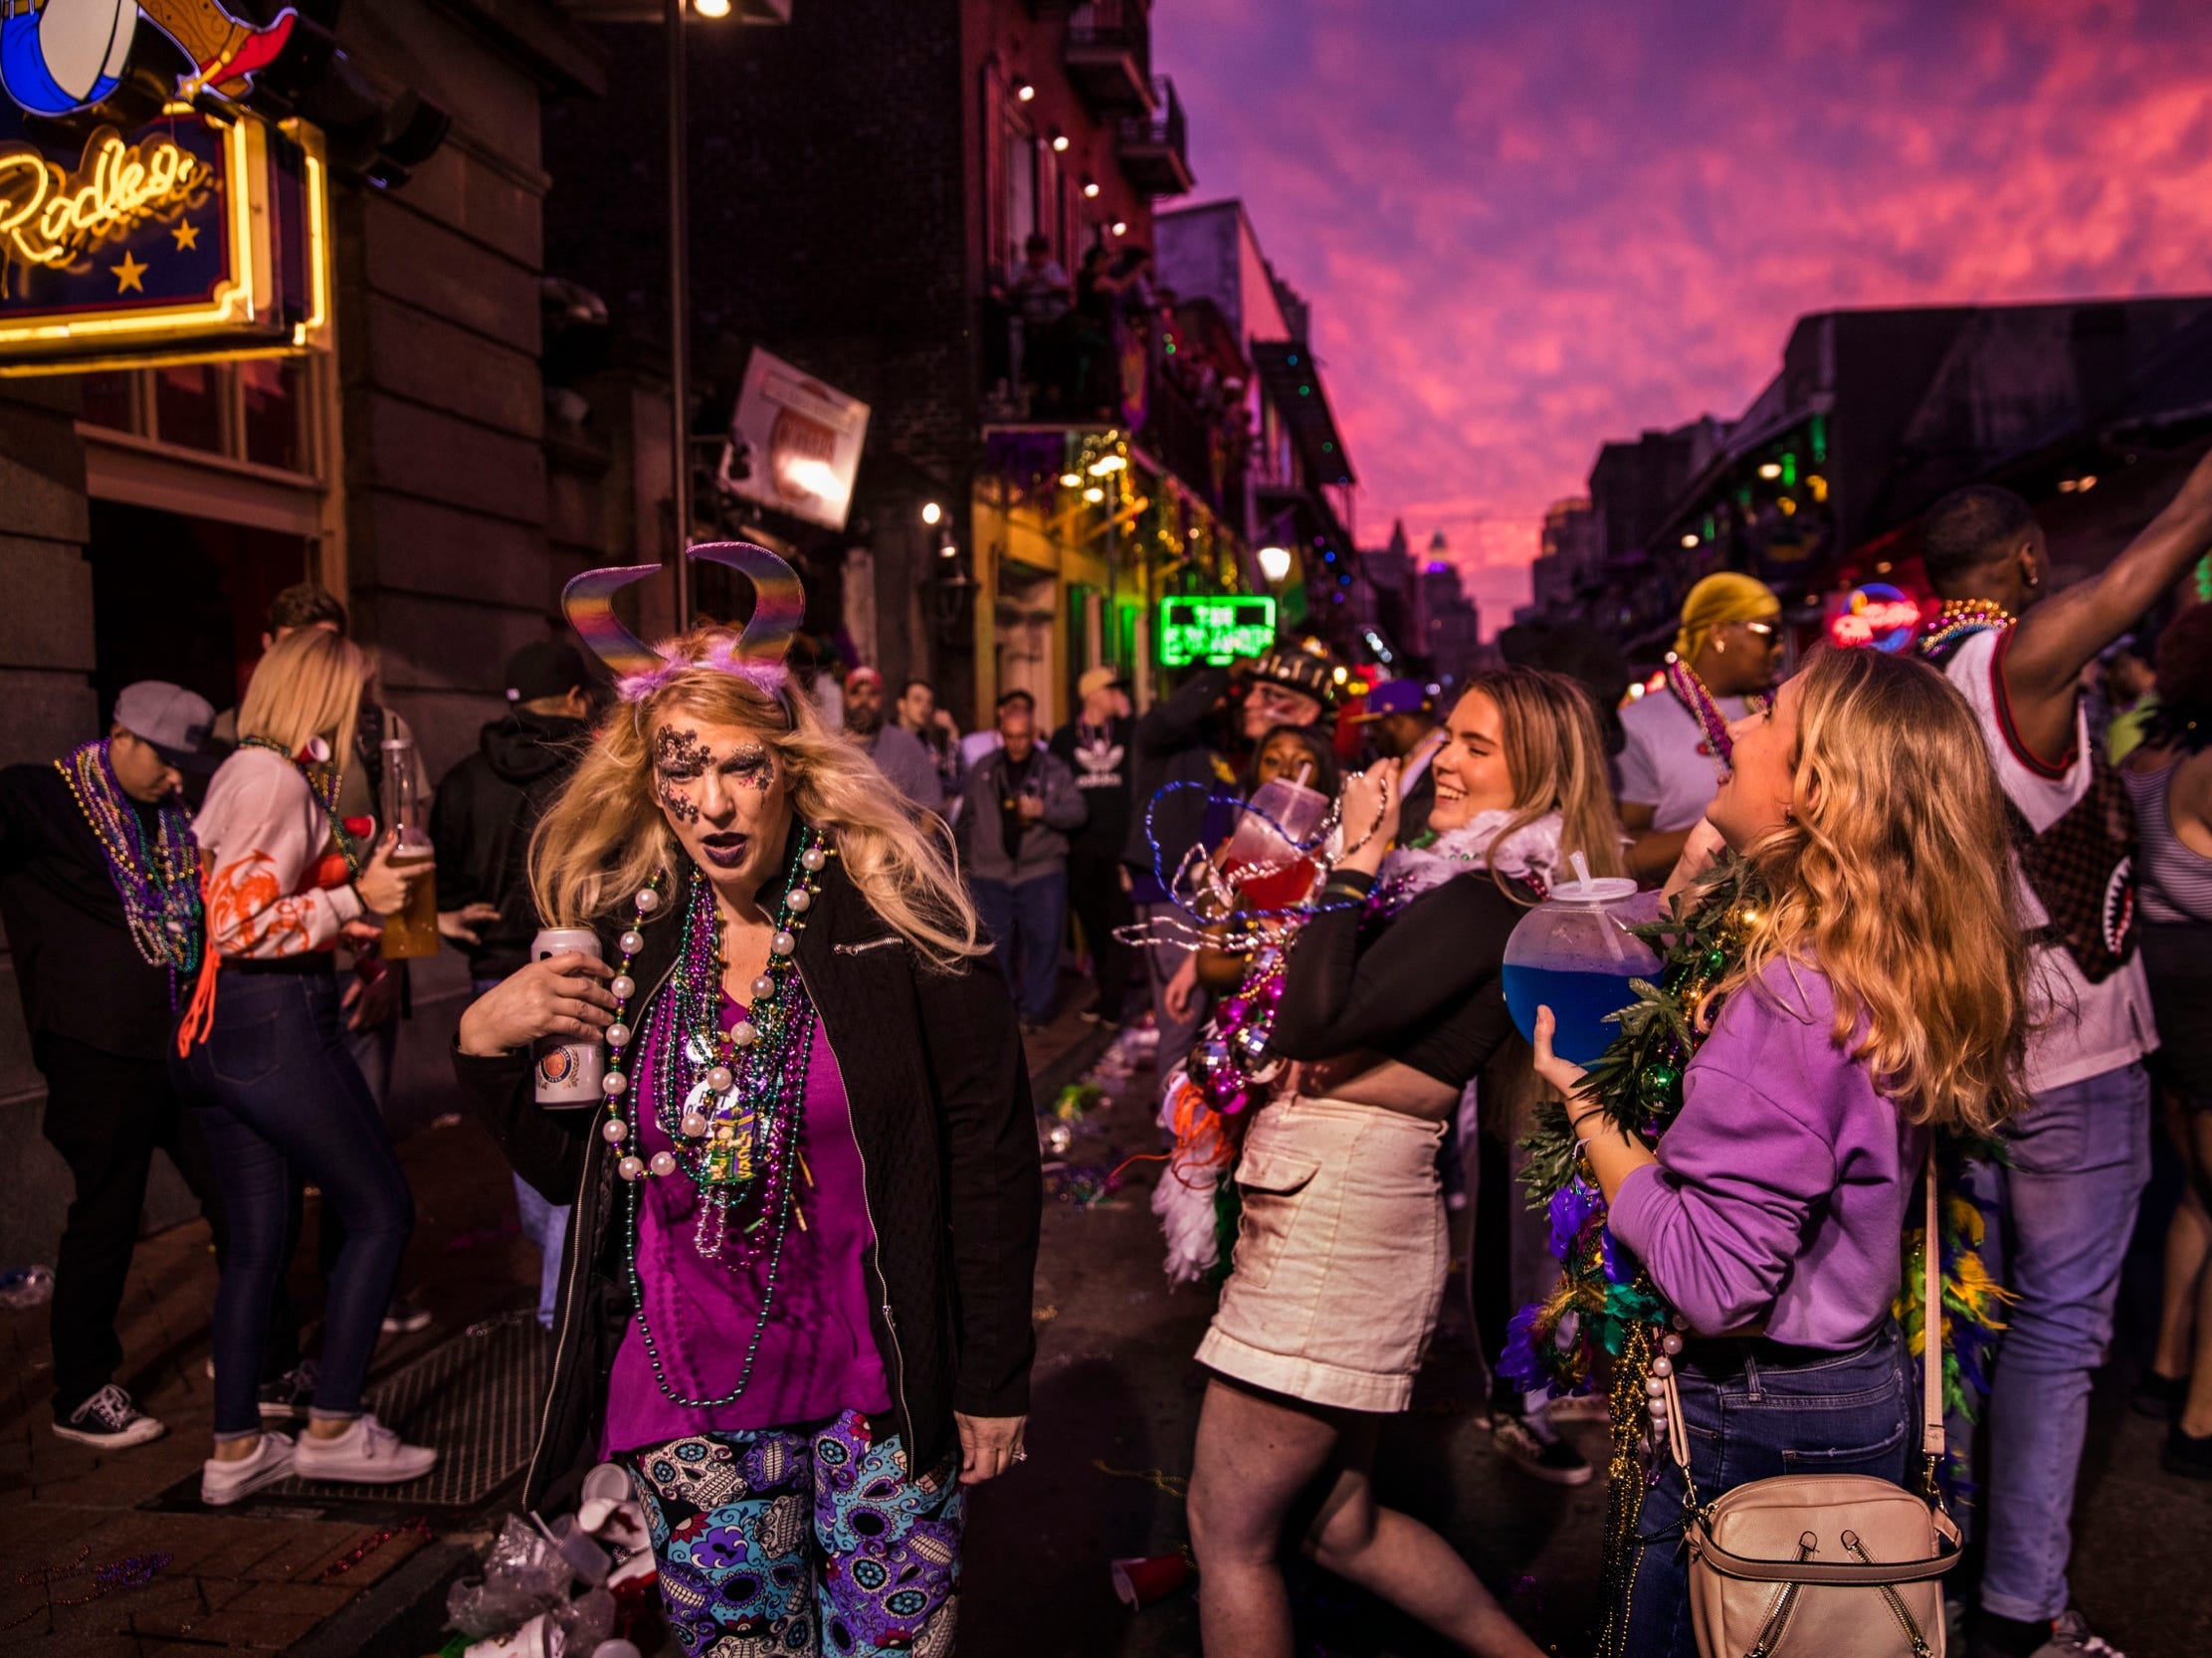 New Orleans is closing bars ahead of Mardi Gras after large crowds were